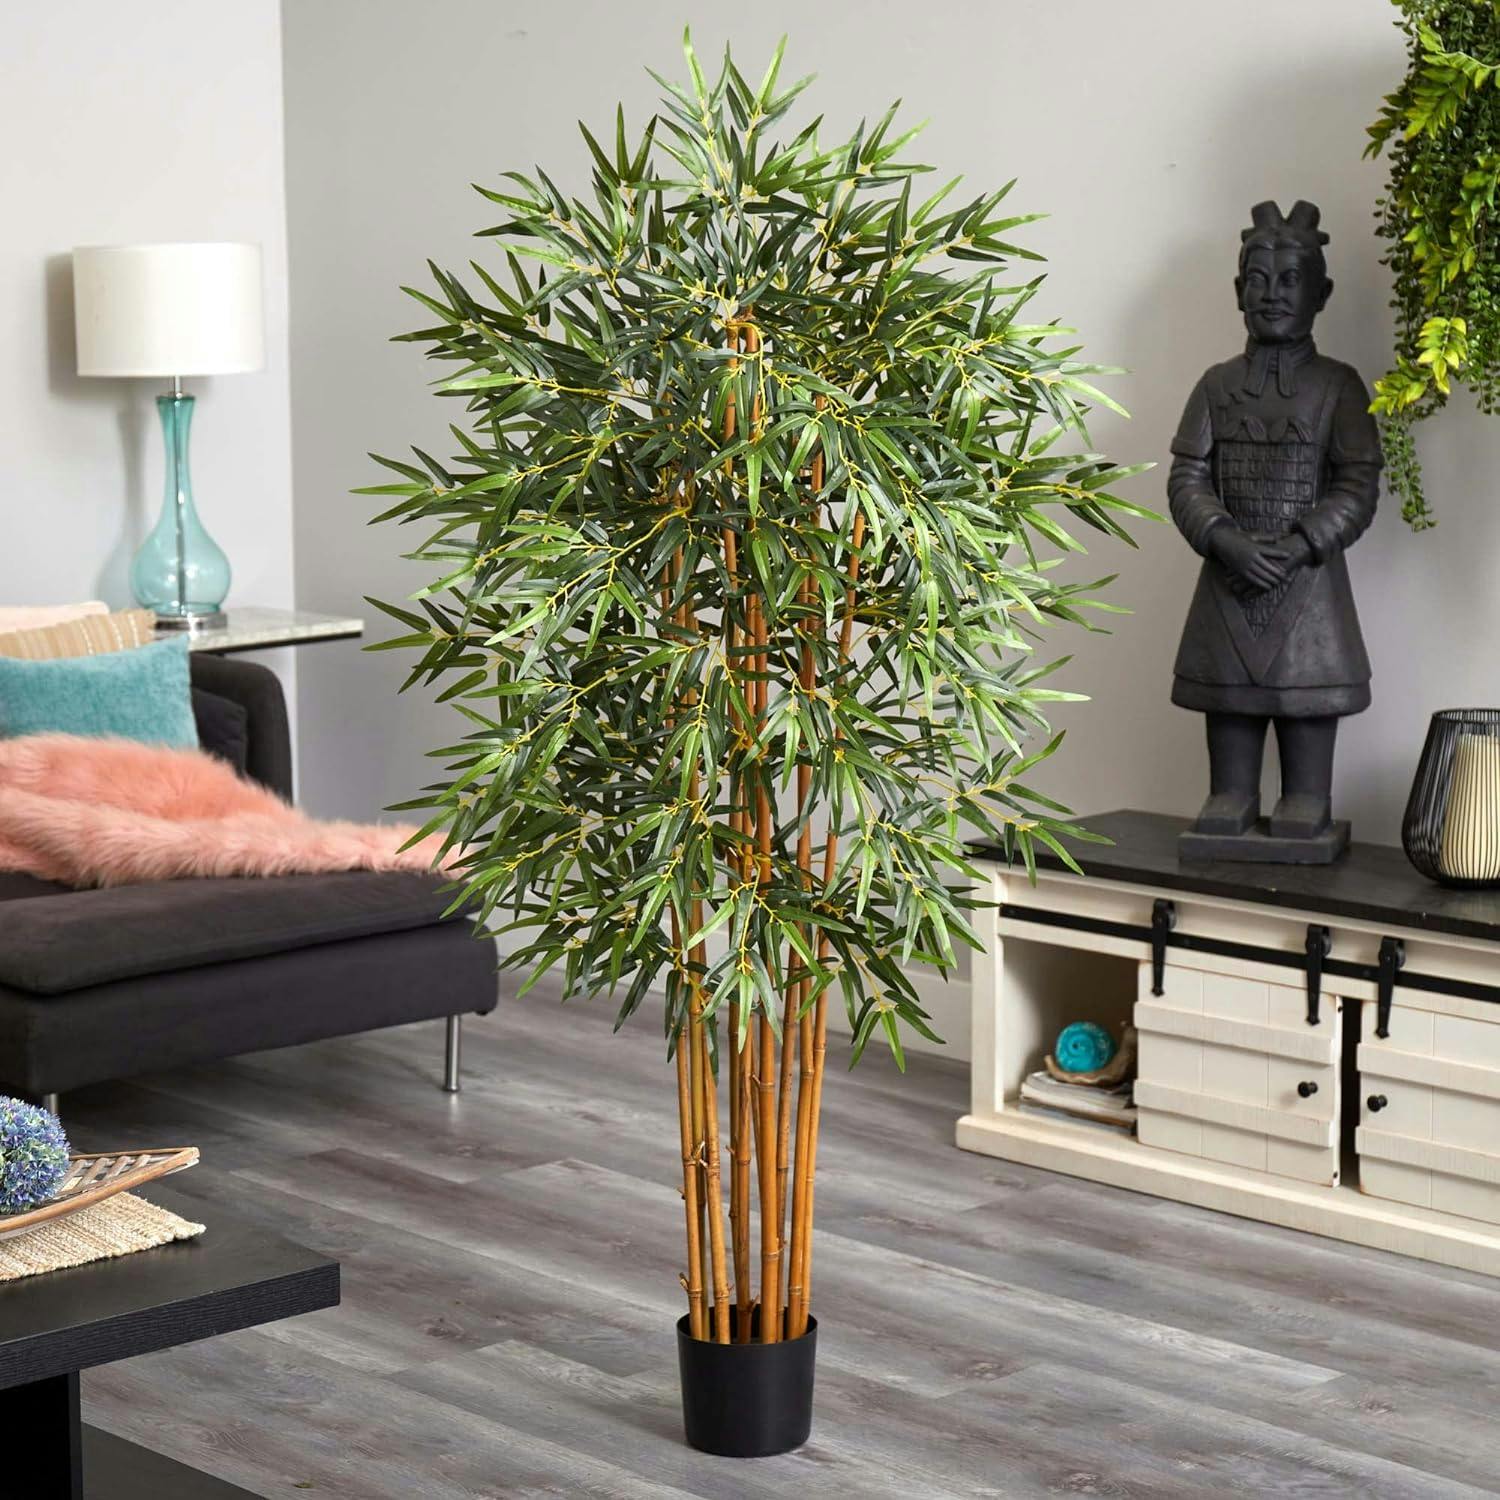 Exotic Curved Bamboo 5ft Silk Potted Tree